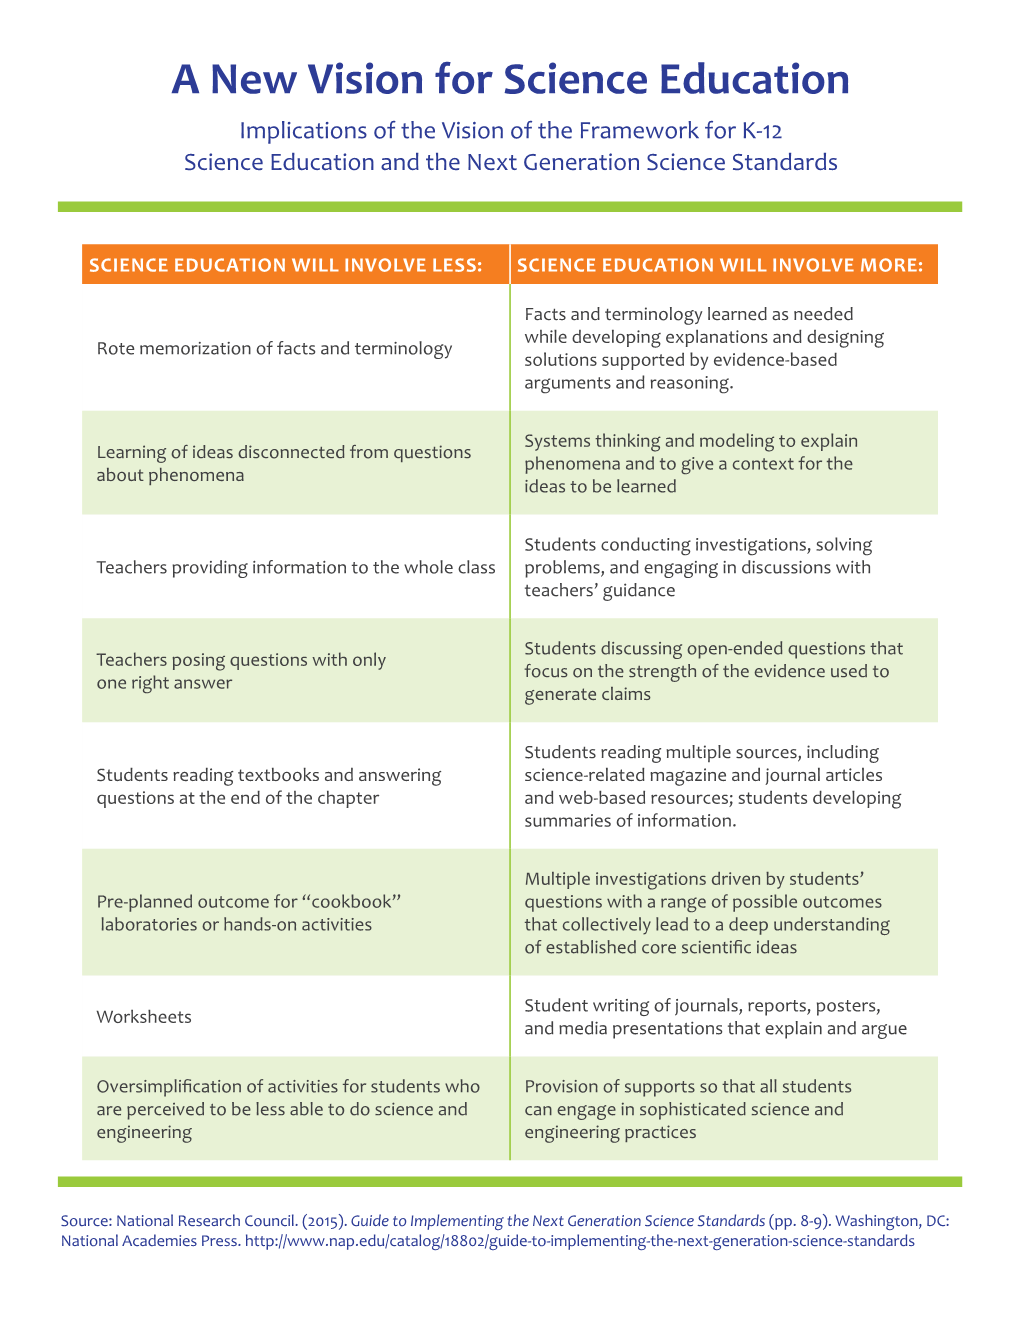 A New Vision for Science Education Implications of the Vision of the Framework for K-12 Science Education and the Next Generation Science Standards